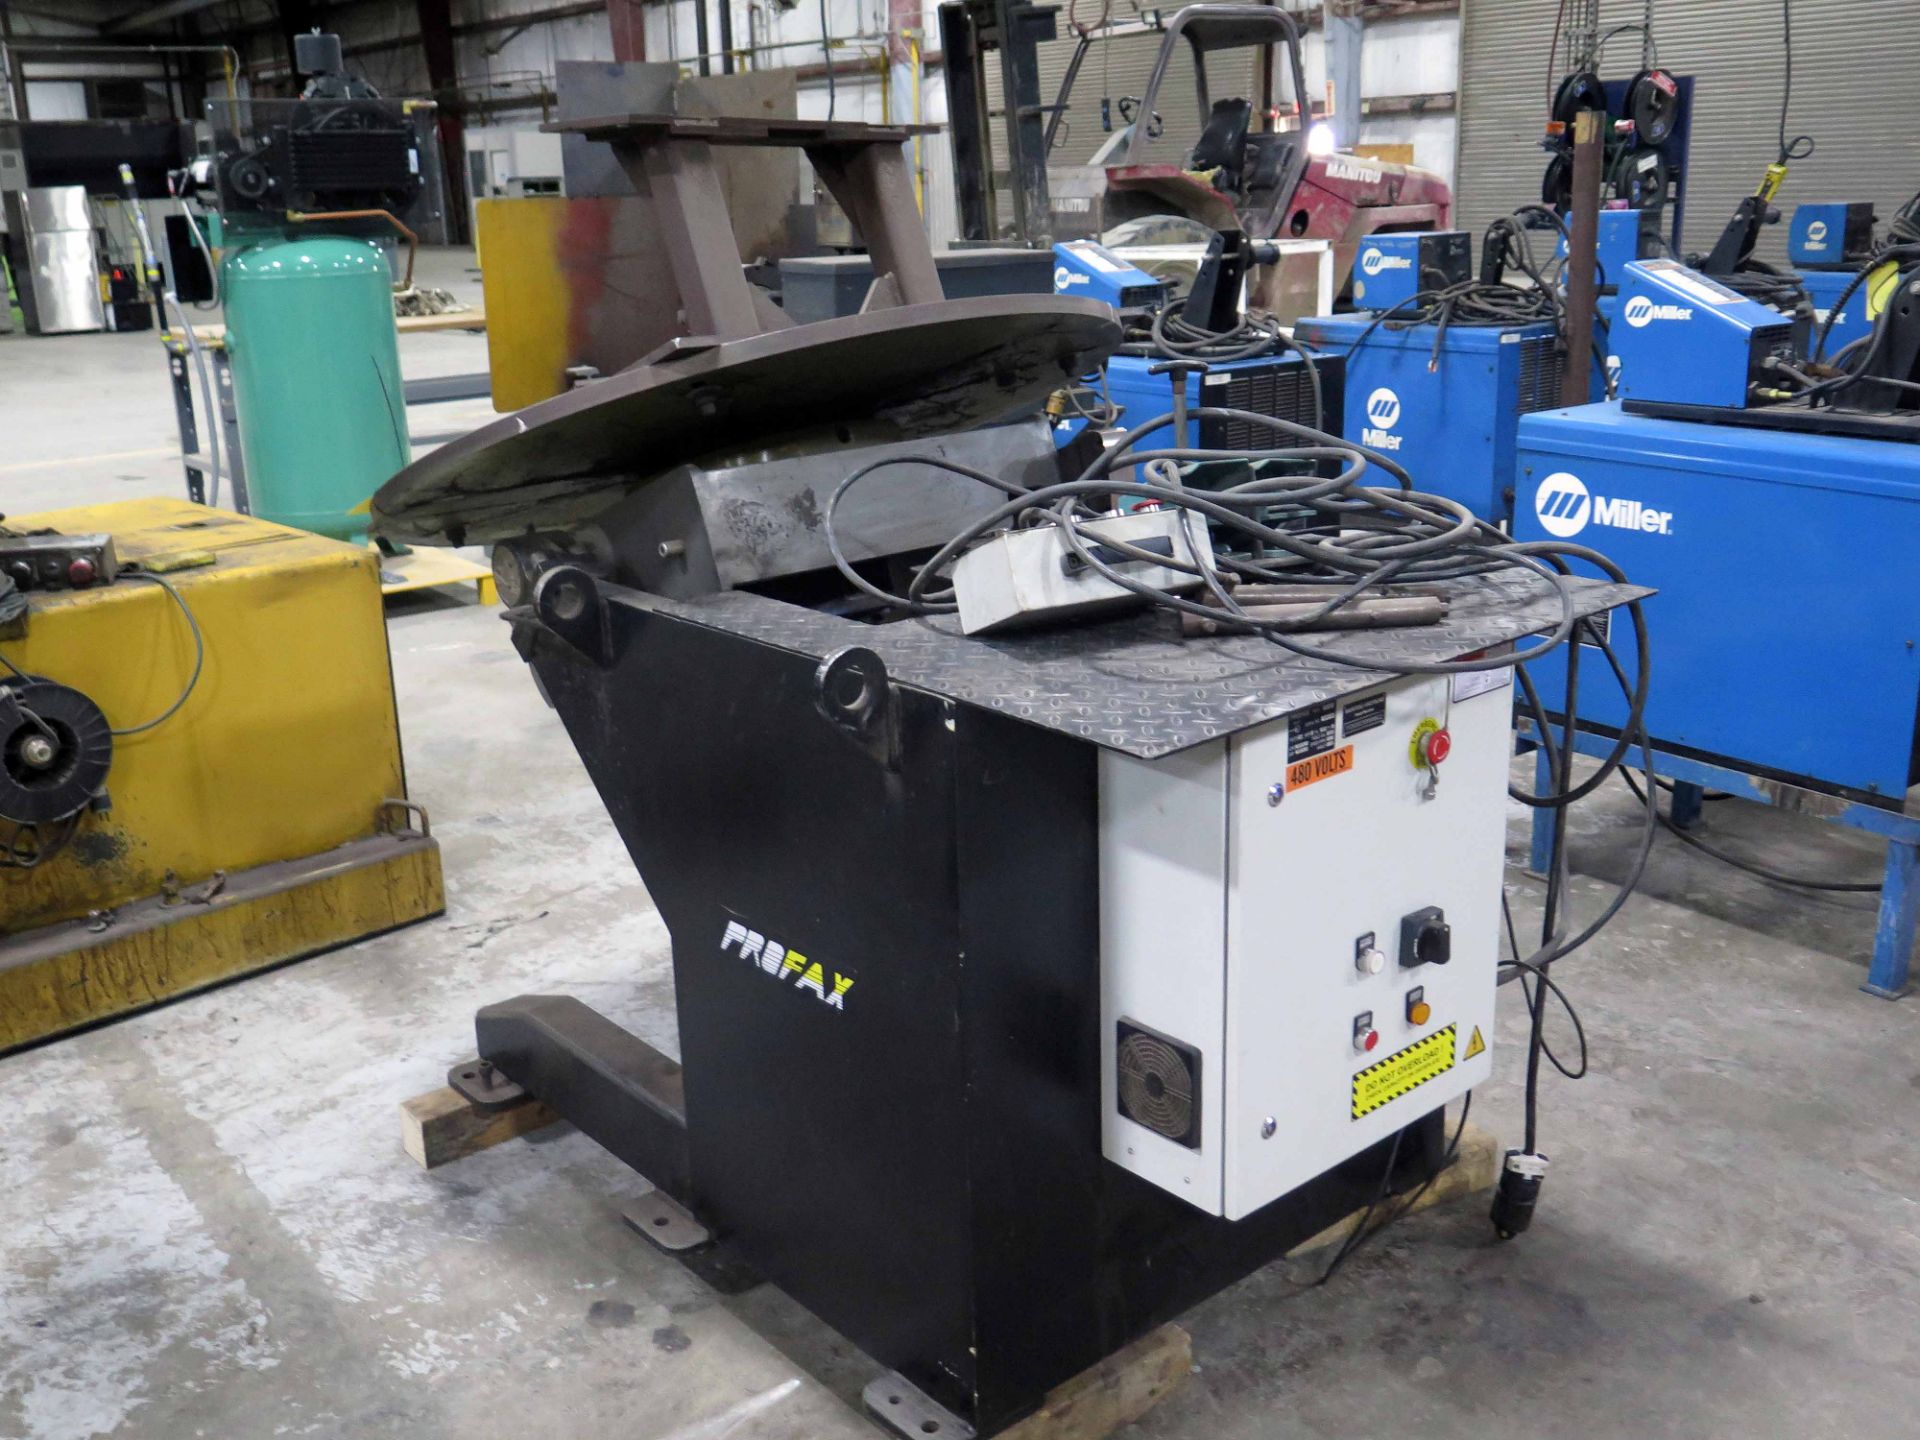 WELDING POSITIONER, PROFAX 6,000 LB. CAP. MDL. WP-6000-4, 47.24" dia. Table, spds: .12 to 1.2 RPM, 0 - Image 2 of 3